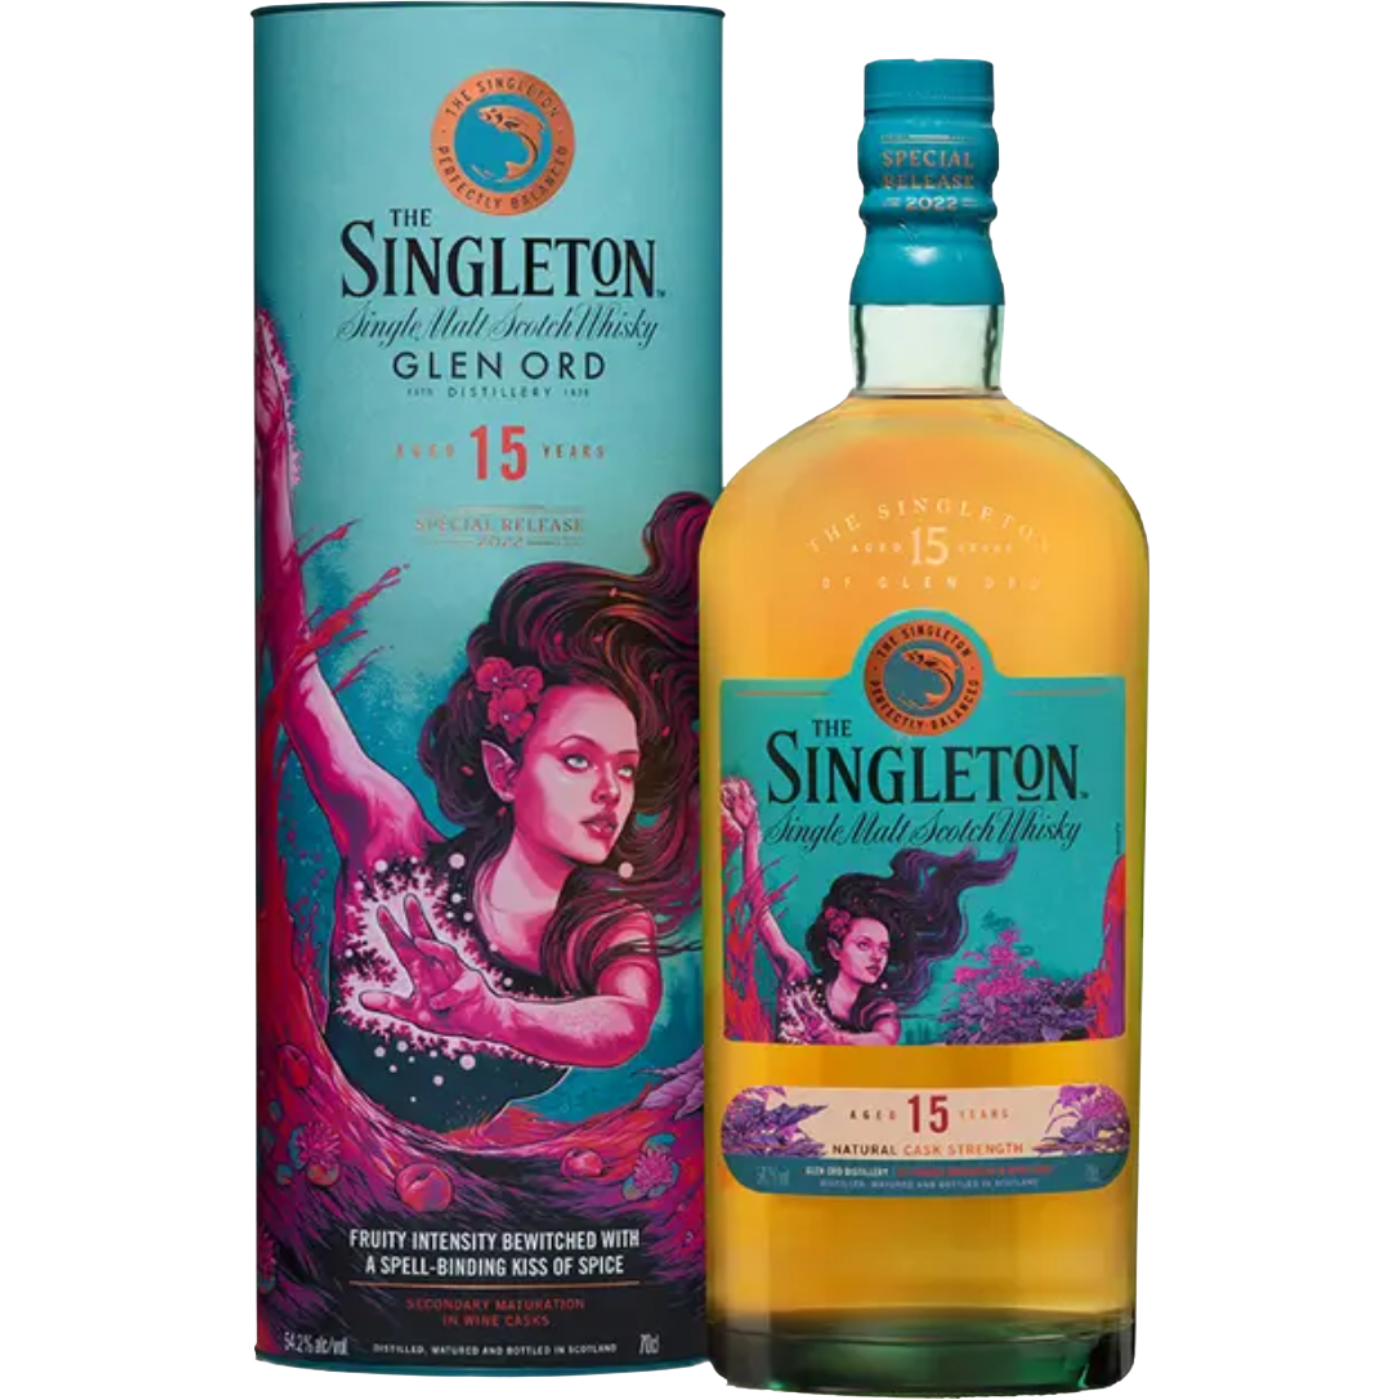 THE SINGLETON OF GLEN ORD 15 Y.O. (SPECIAL RELEASE 2022)